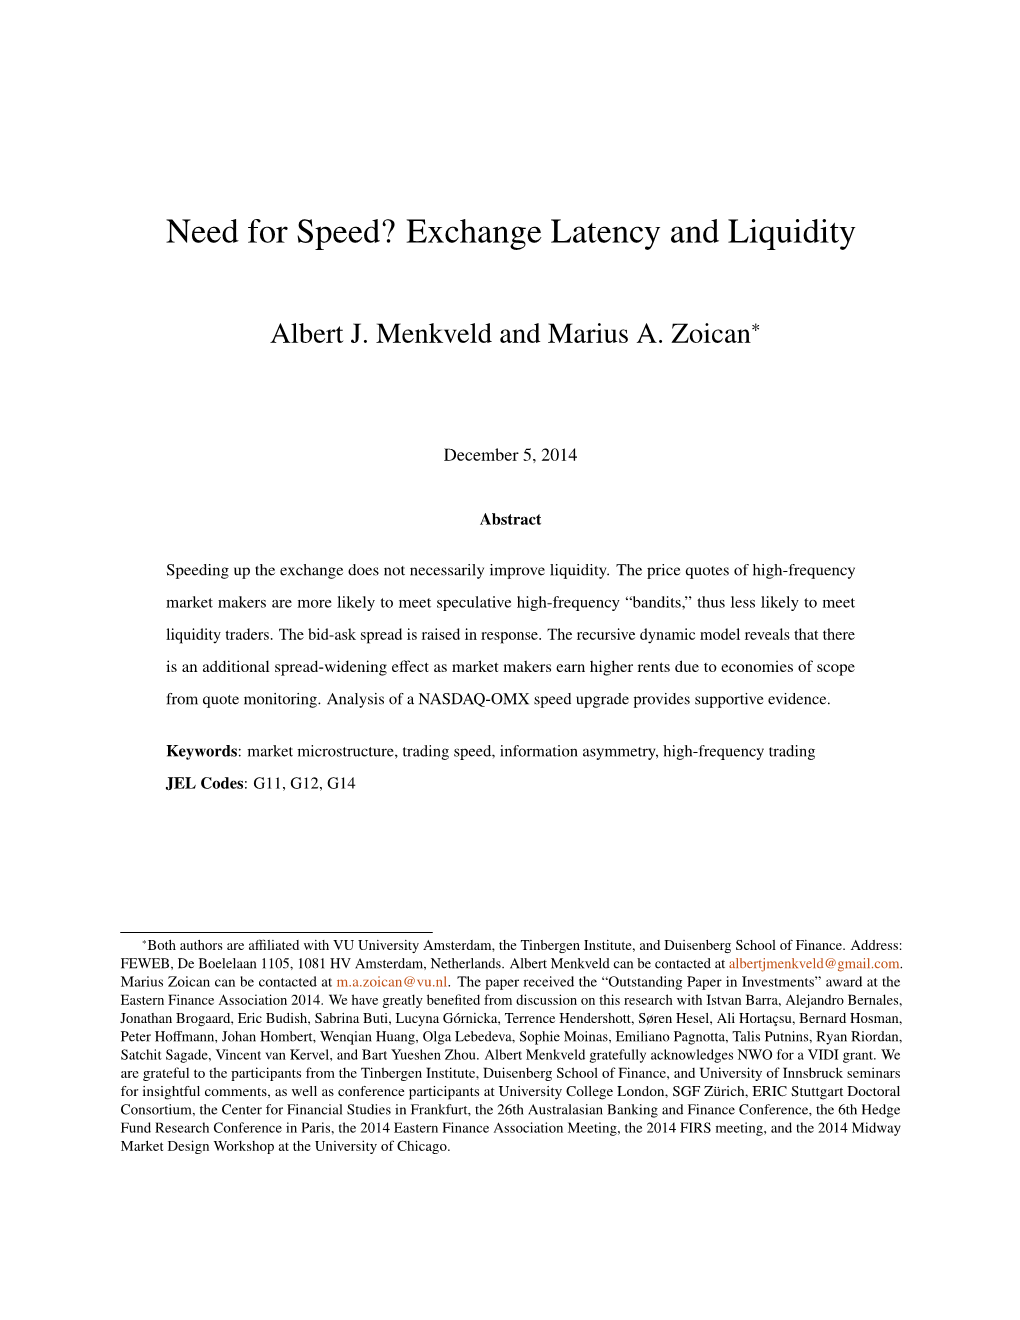 Need for Speed? Exchange Latency and Liquidity